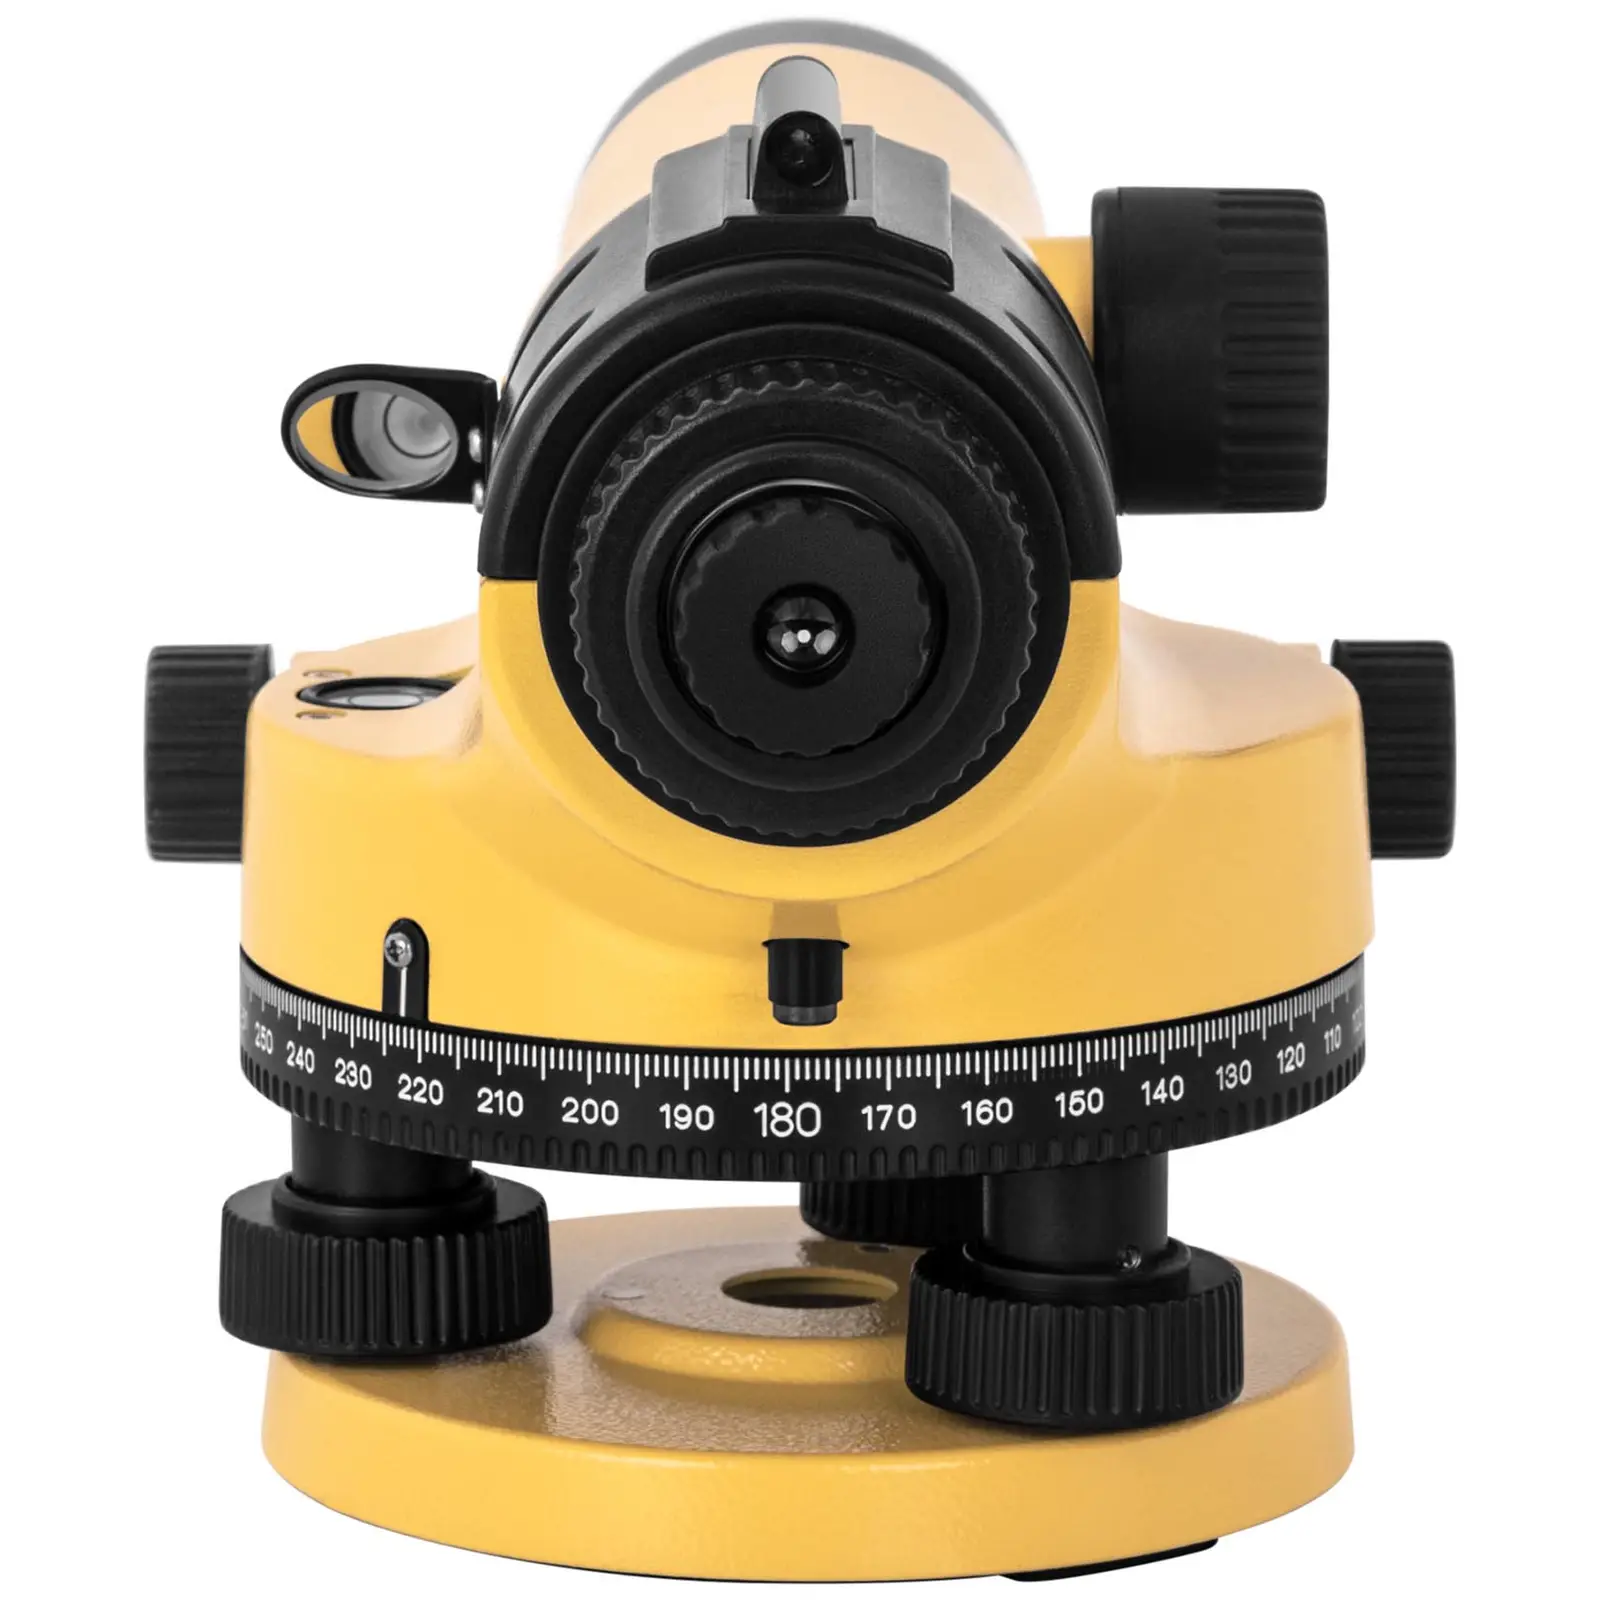 Automatic Level - with tripod and level staff - 32x magnification - 38 mm lens - deviation 1 mm - magnetic compensator